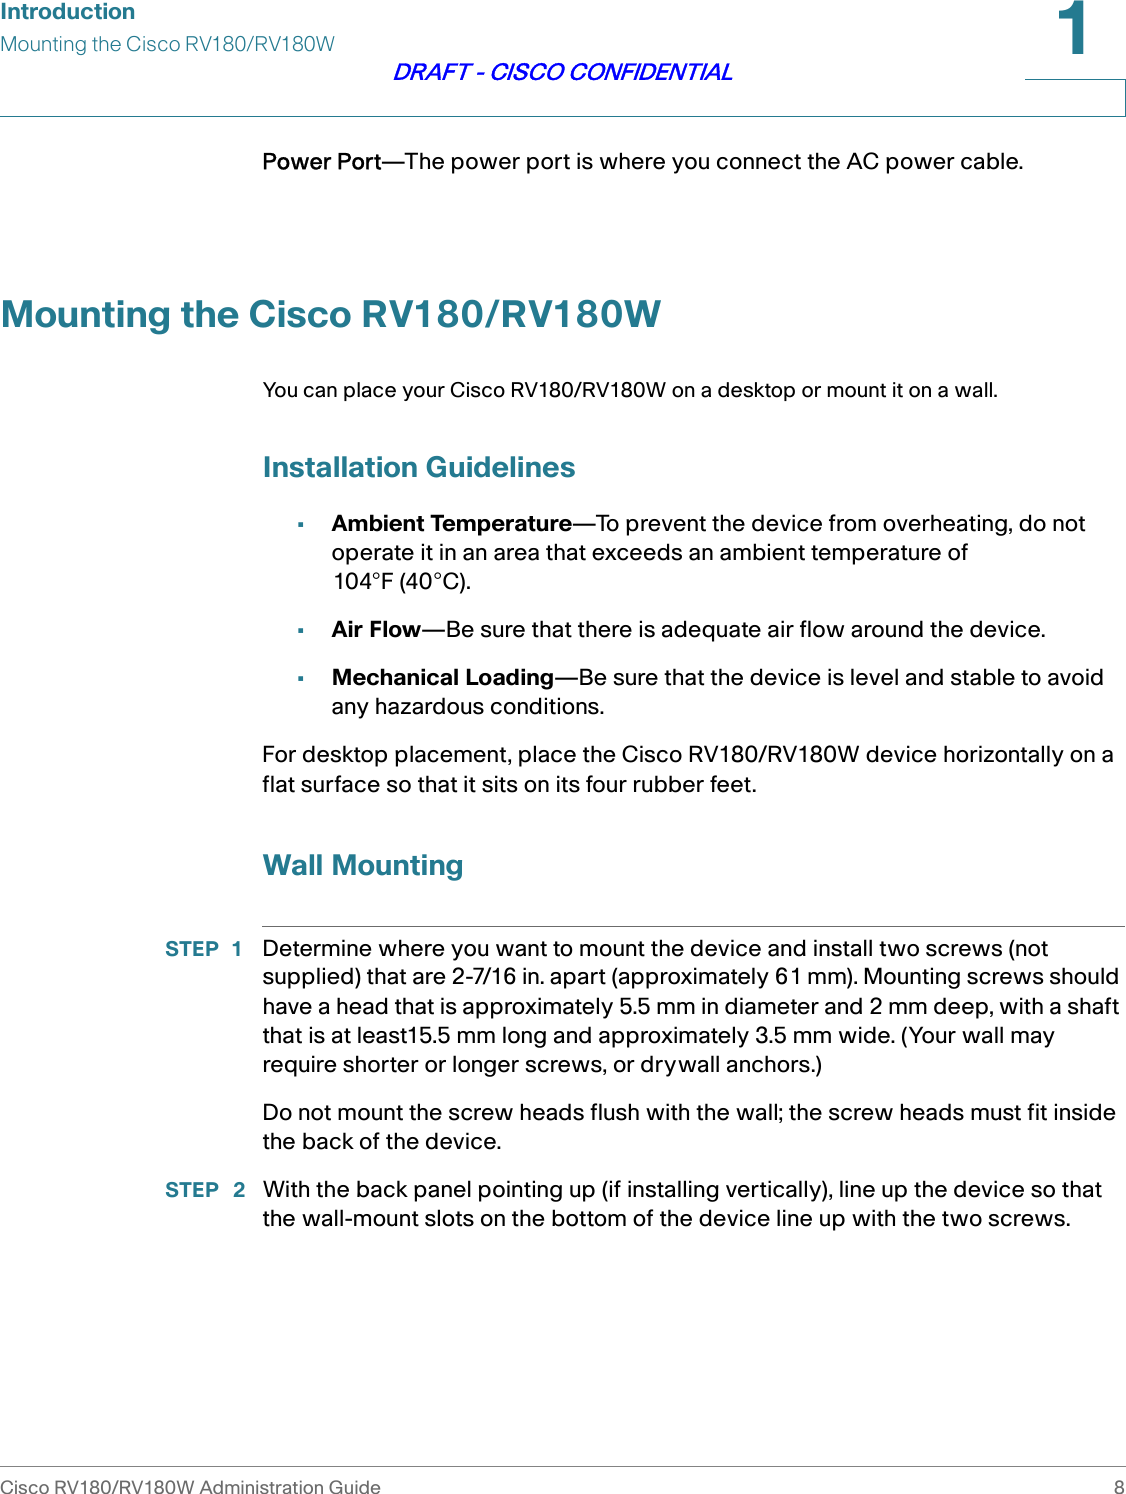 IntroductionMounting the Cisco RV180/RV180WCisco RV180/RV180W Administration Guide 81DRAFT - CISCO CONFIDENTIALPower Port—The power port is where you connect the AC power cable.Mounting the Cisco RV180/RV180WYou can place your Cisco RV180/RV180W on a desktop or mount it on a wall.Installation Guidelines•Ambient Temperature—To prevent the device from overheating, do not operate it in an area that exceeds an ambient temperature of 104°F (40°C).•Air Flow—Be sure that there is adequate air flow around the device.•Mechanical Loading—Be sure that the device is level and stable to avoid any hazardous conditions.For desktop placement, place the Cisco RV180/RV180W device horizontally on a flat surface so that it sits on its four rubber feet.Wall MountingSTEP 1 Determine where you want to mount the device and install two screws (not supplied) that are 2-7/16 in. apart (approximately 61 mm). Mounting screws should have a head that is approximately 5.5 mm in diameter and 2 mm deep, with a shaft that is at least15.5 mm long and approximately 3.5 mm wide. (Your wall may require shorter or longer screws, or drywall anchors.)Do not mount the screw heads flush with the wall; the screw heads must fit inside the back of the device. STEP  2 With the back panel pointing up (if installing vertically), line up the device so that the wall-mount slots on the bottom of the device line up with the two screws.